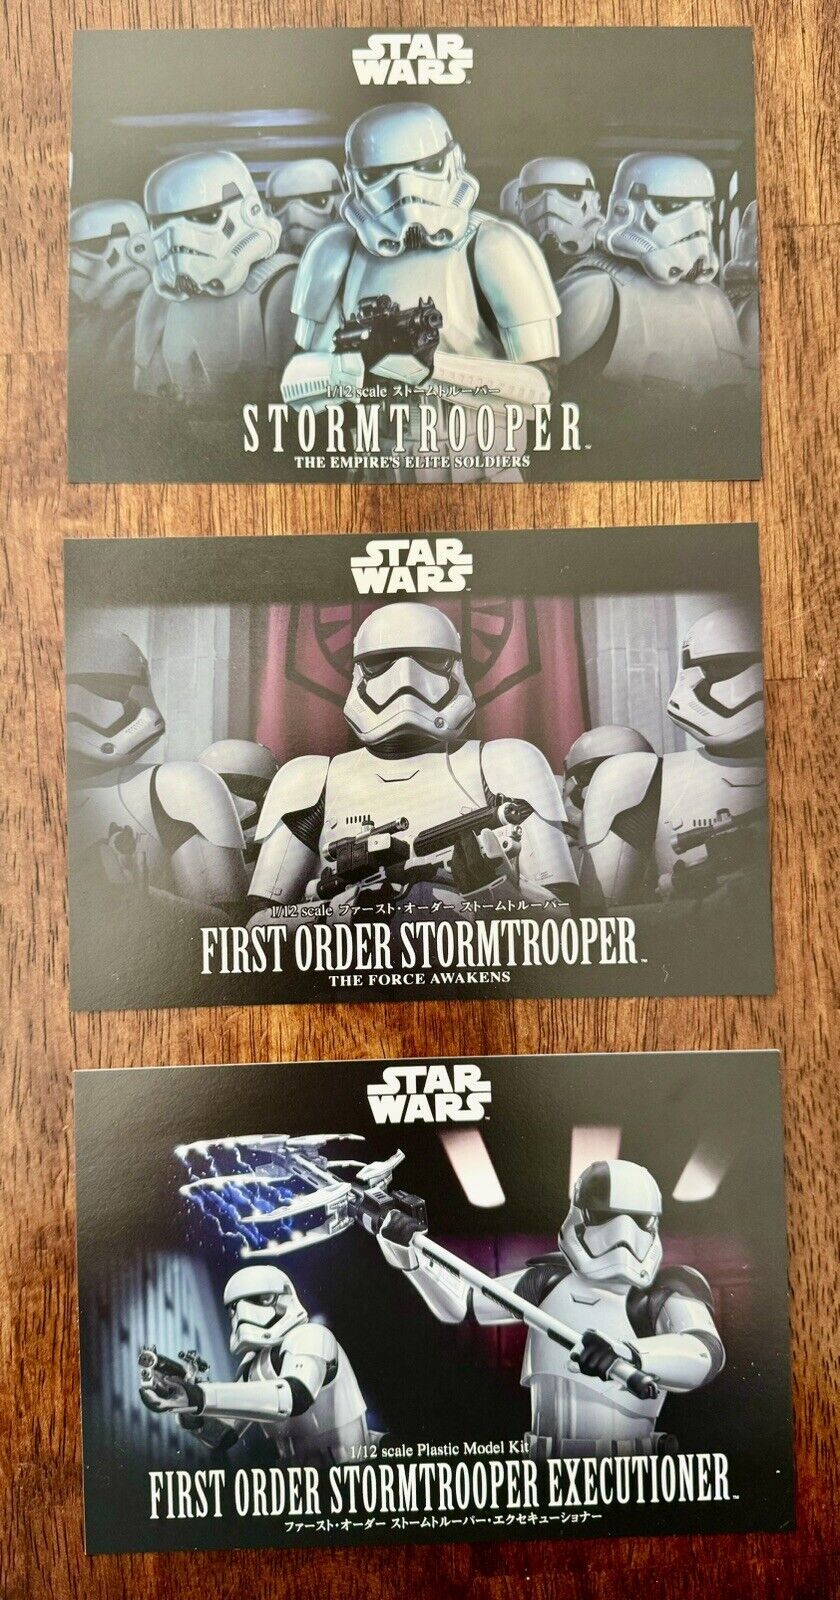 Star Wars Model Concept Advance Promo Cards Distributed c2015 The Force Awakens